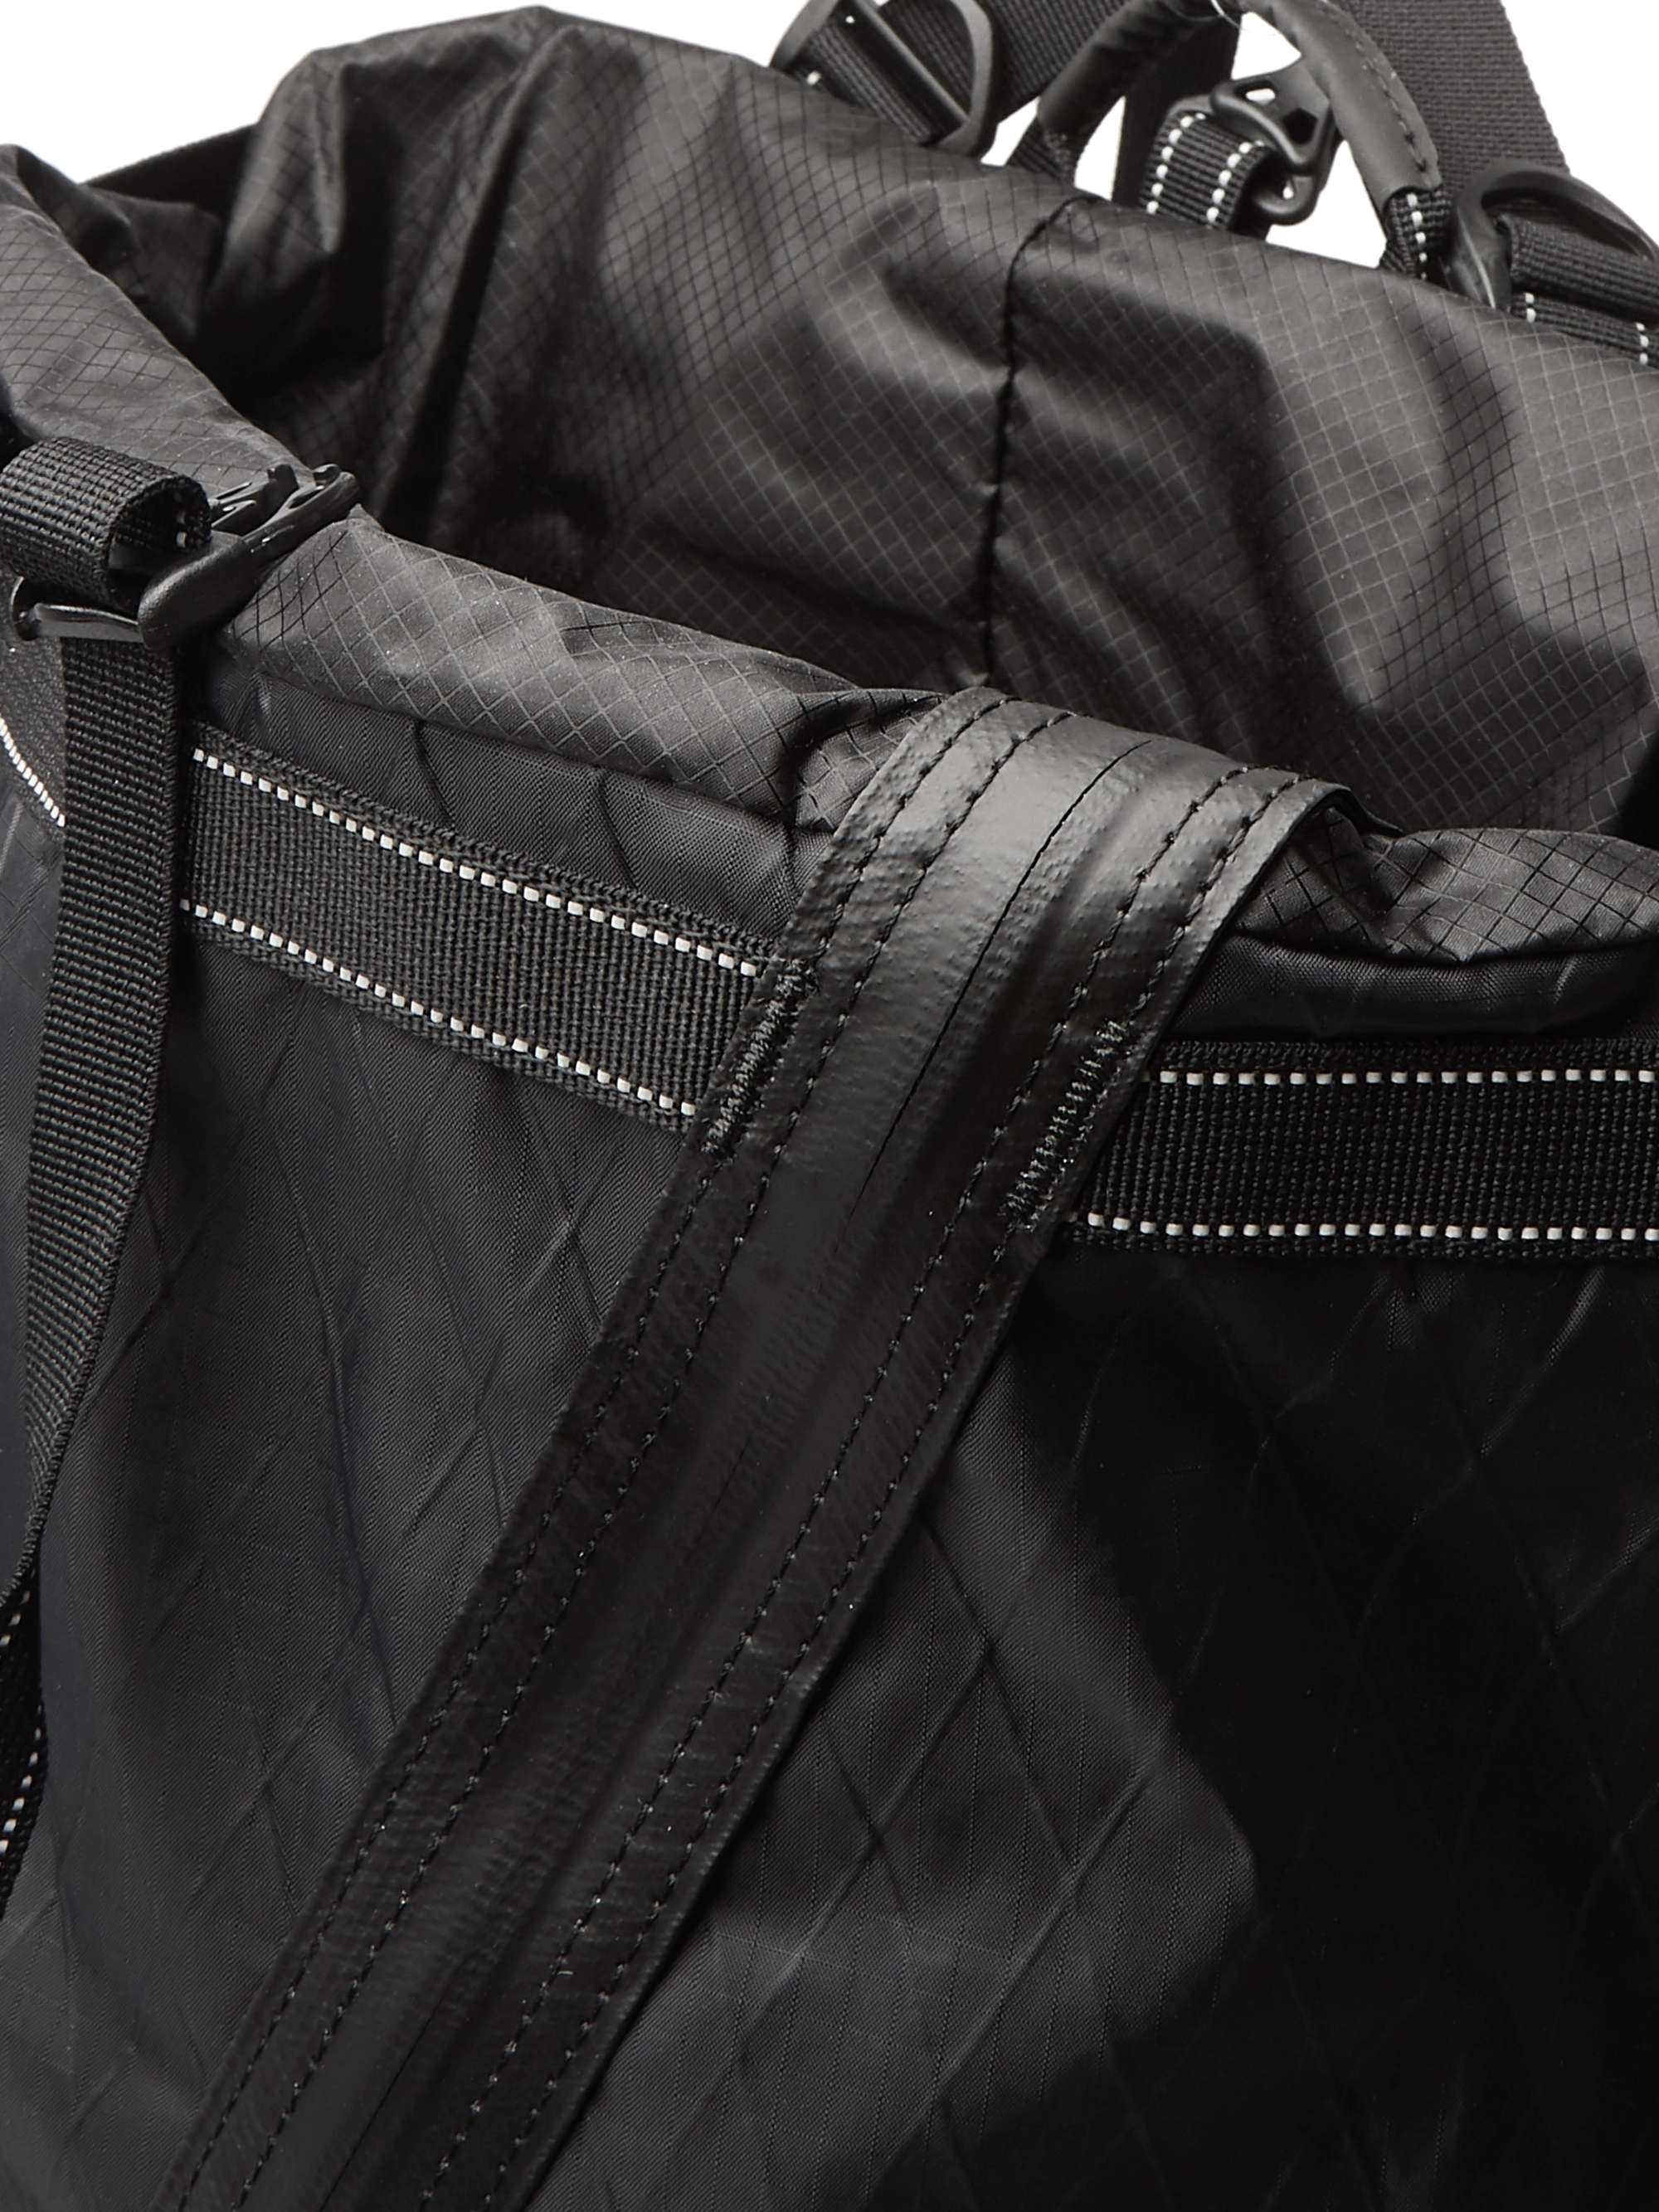 AND WANDER CORDURA-Trimmed X-Pac Backpack